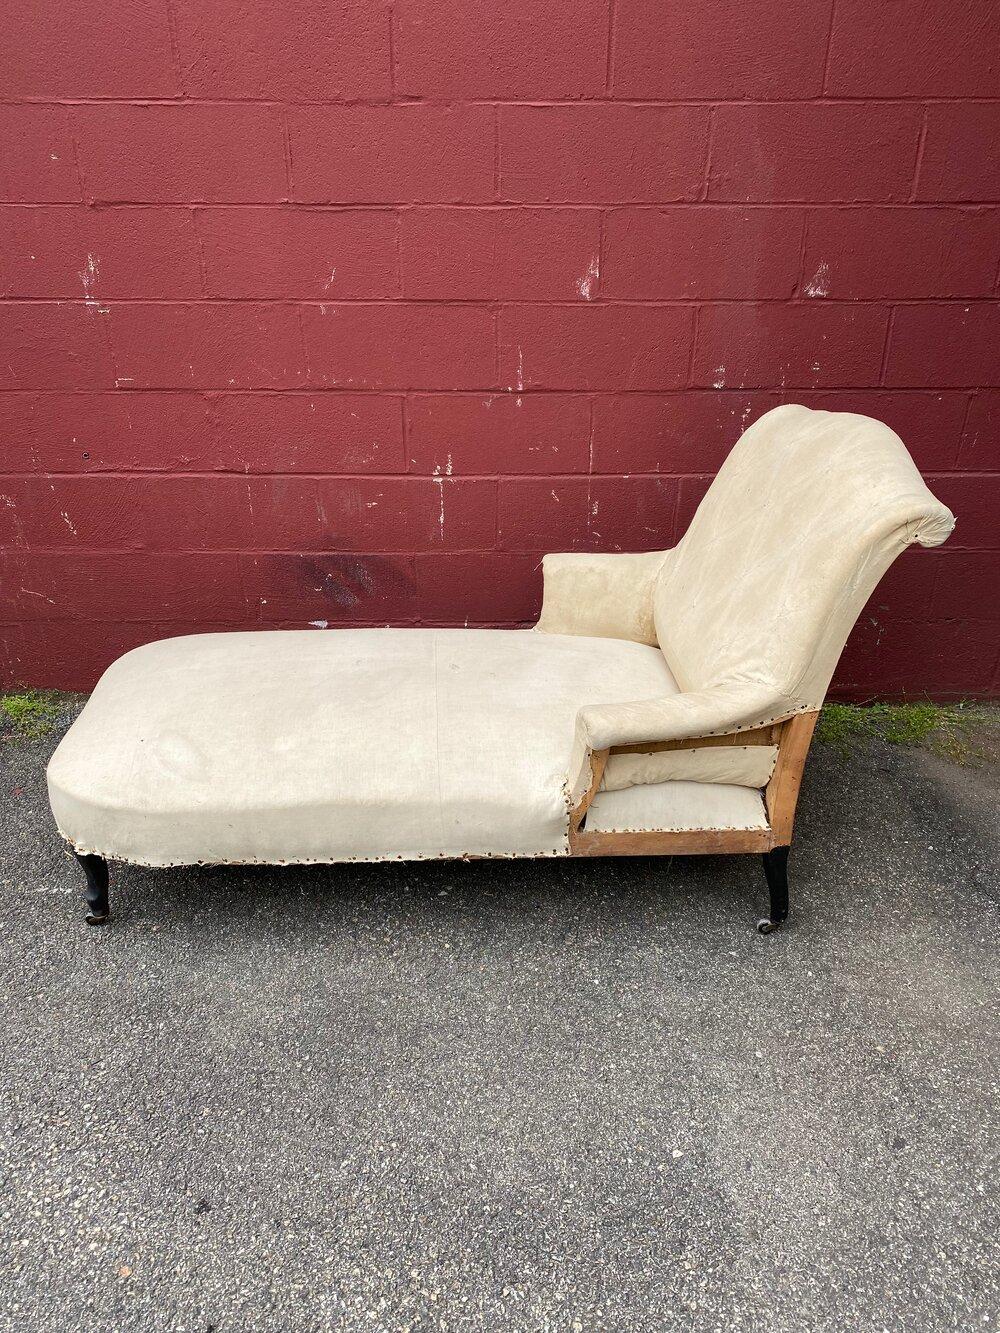 A very elegant French 19th century chaise longue with scrolled back. The original fabric has been stripped off, revealing part of the wooden frame in muslin. Structurally sound and extremely comfortable, a showpiece when reupholstered.

Ref #: